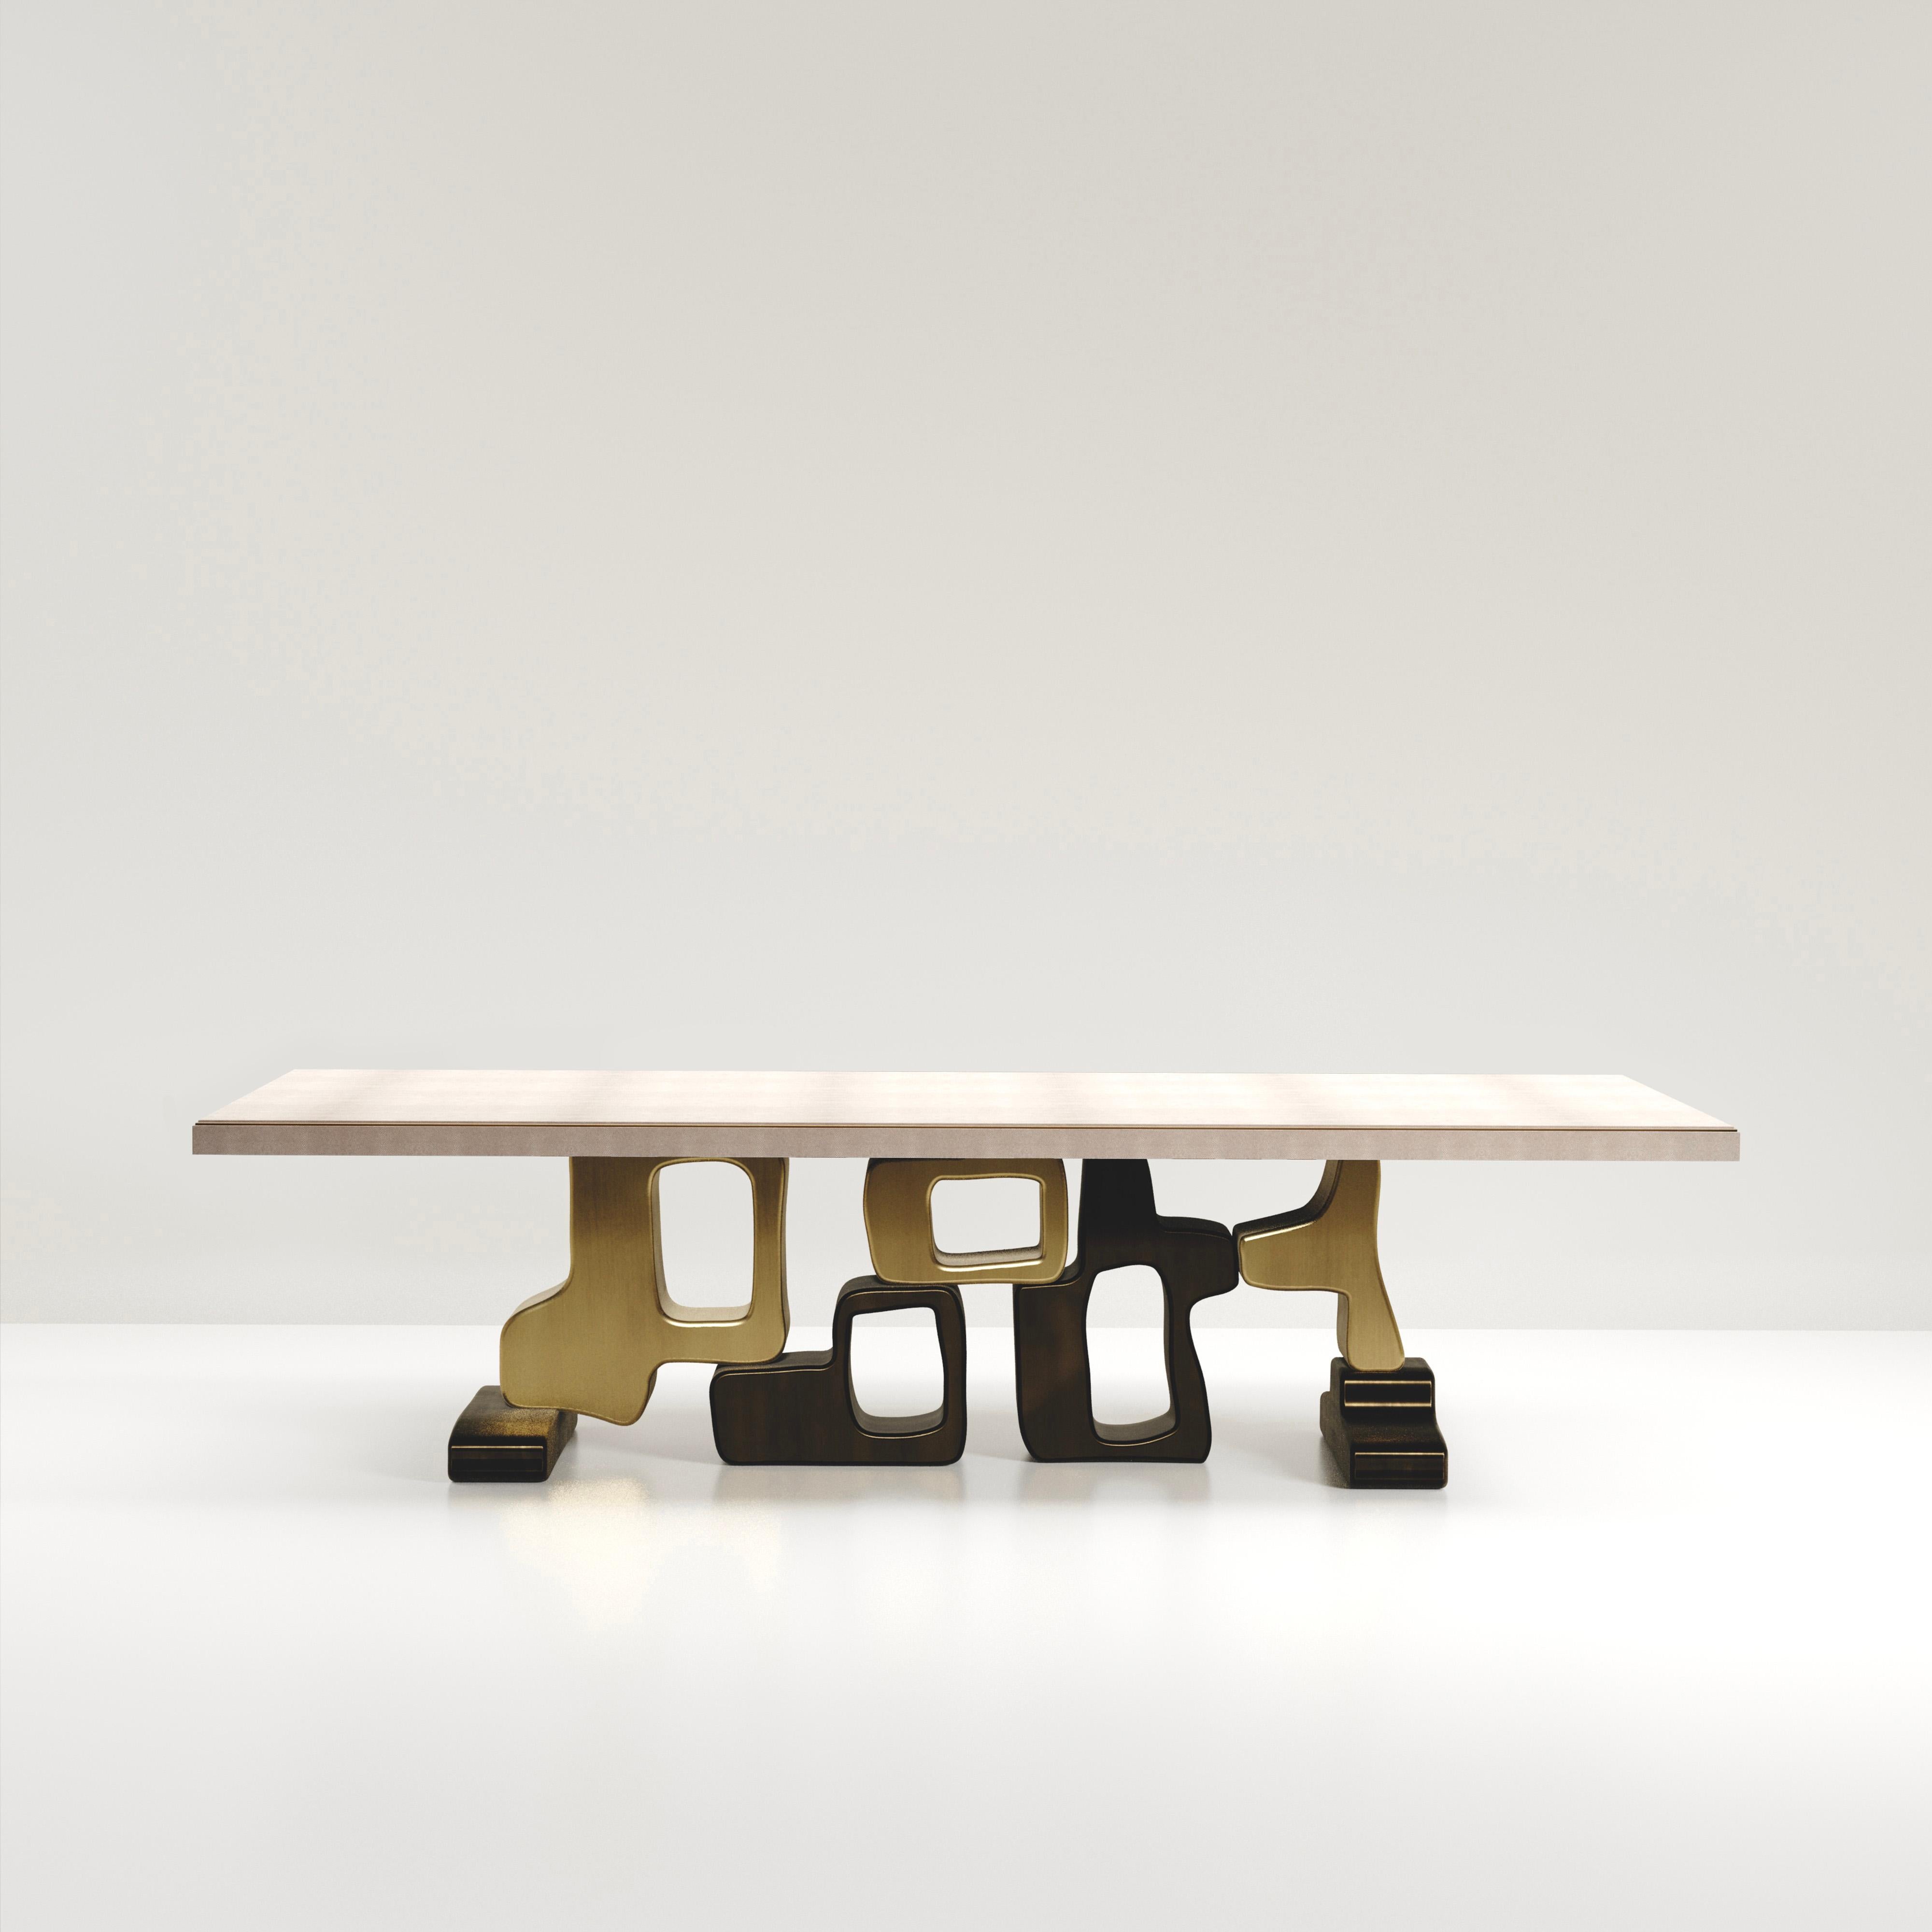 The Apoli II dining table by Kifu Paris is both dramatic and organic its unique design. The cream shagreen inlaid top sits on a long clustered geometric and sculptural bronze-patina brass base. This piece is designed by Kifu Augousti the daughter of